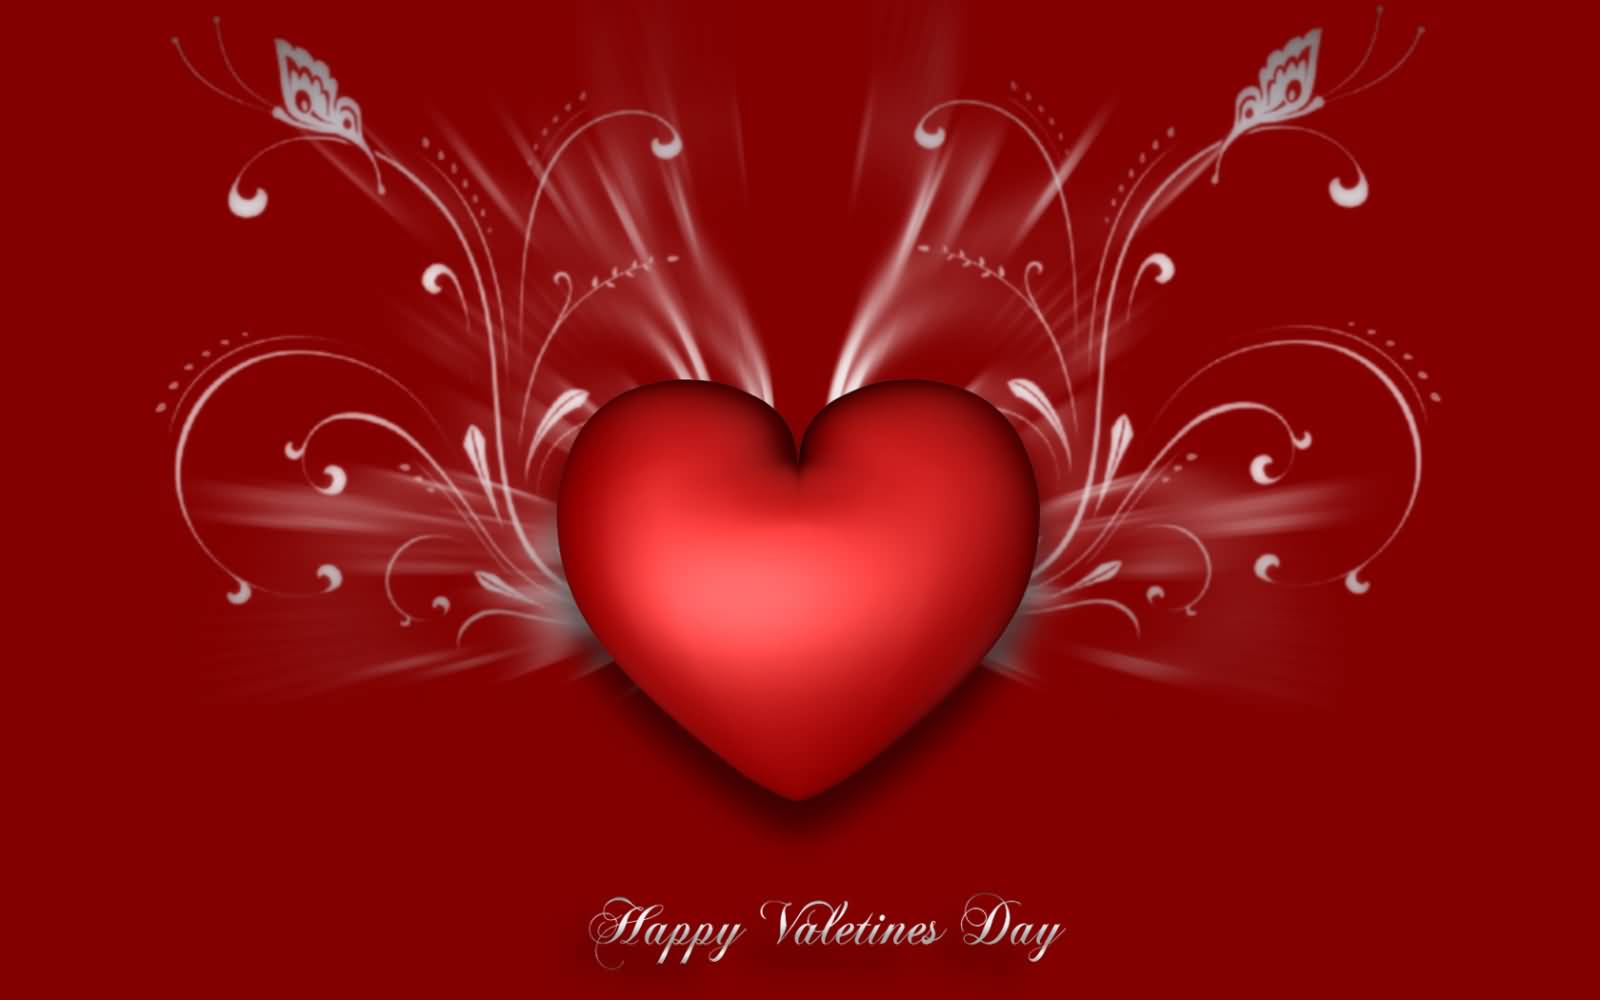 Happy Valentine's Day Red Heart HD Wallpaper